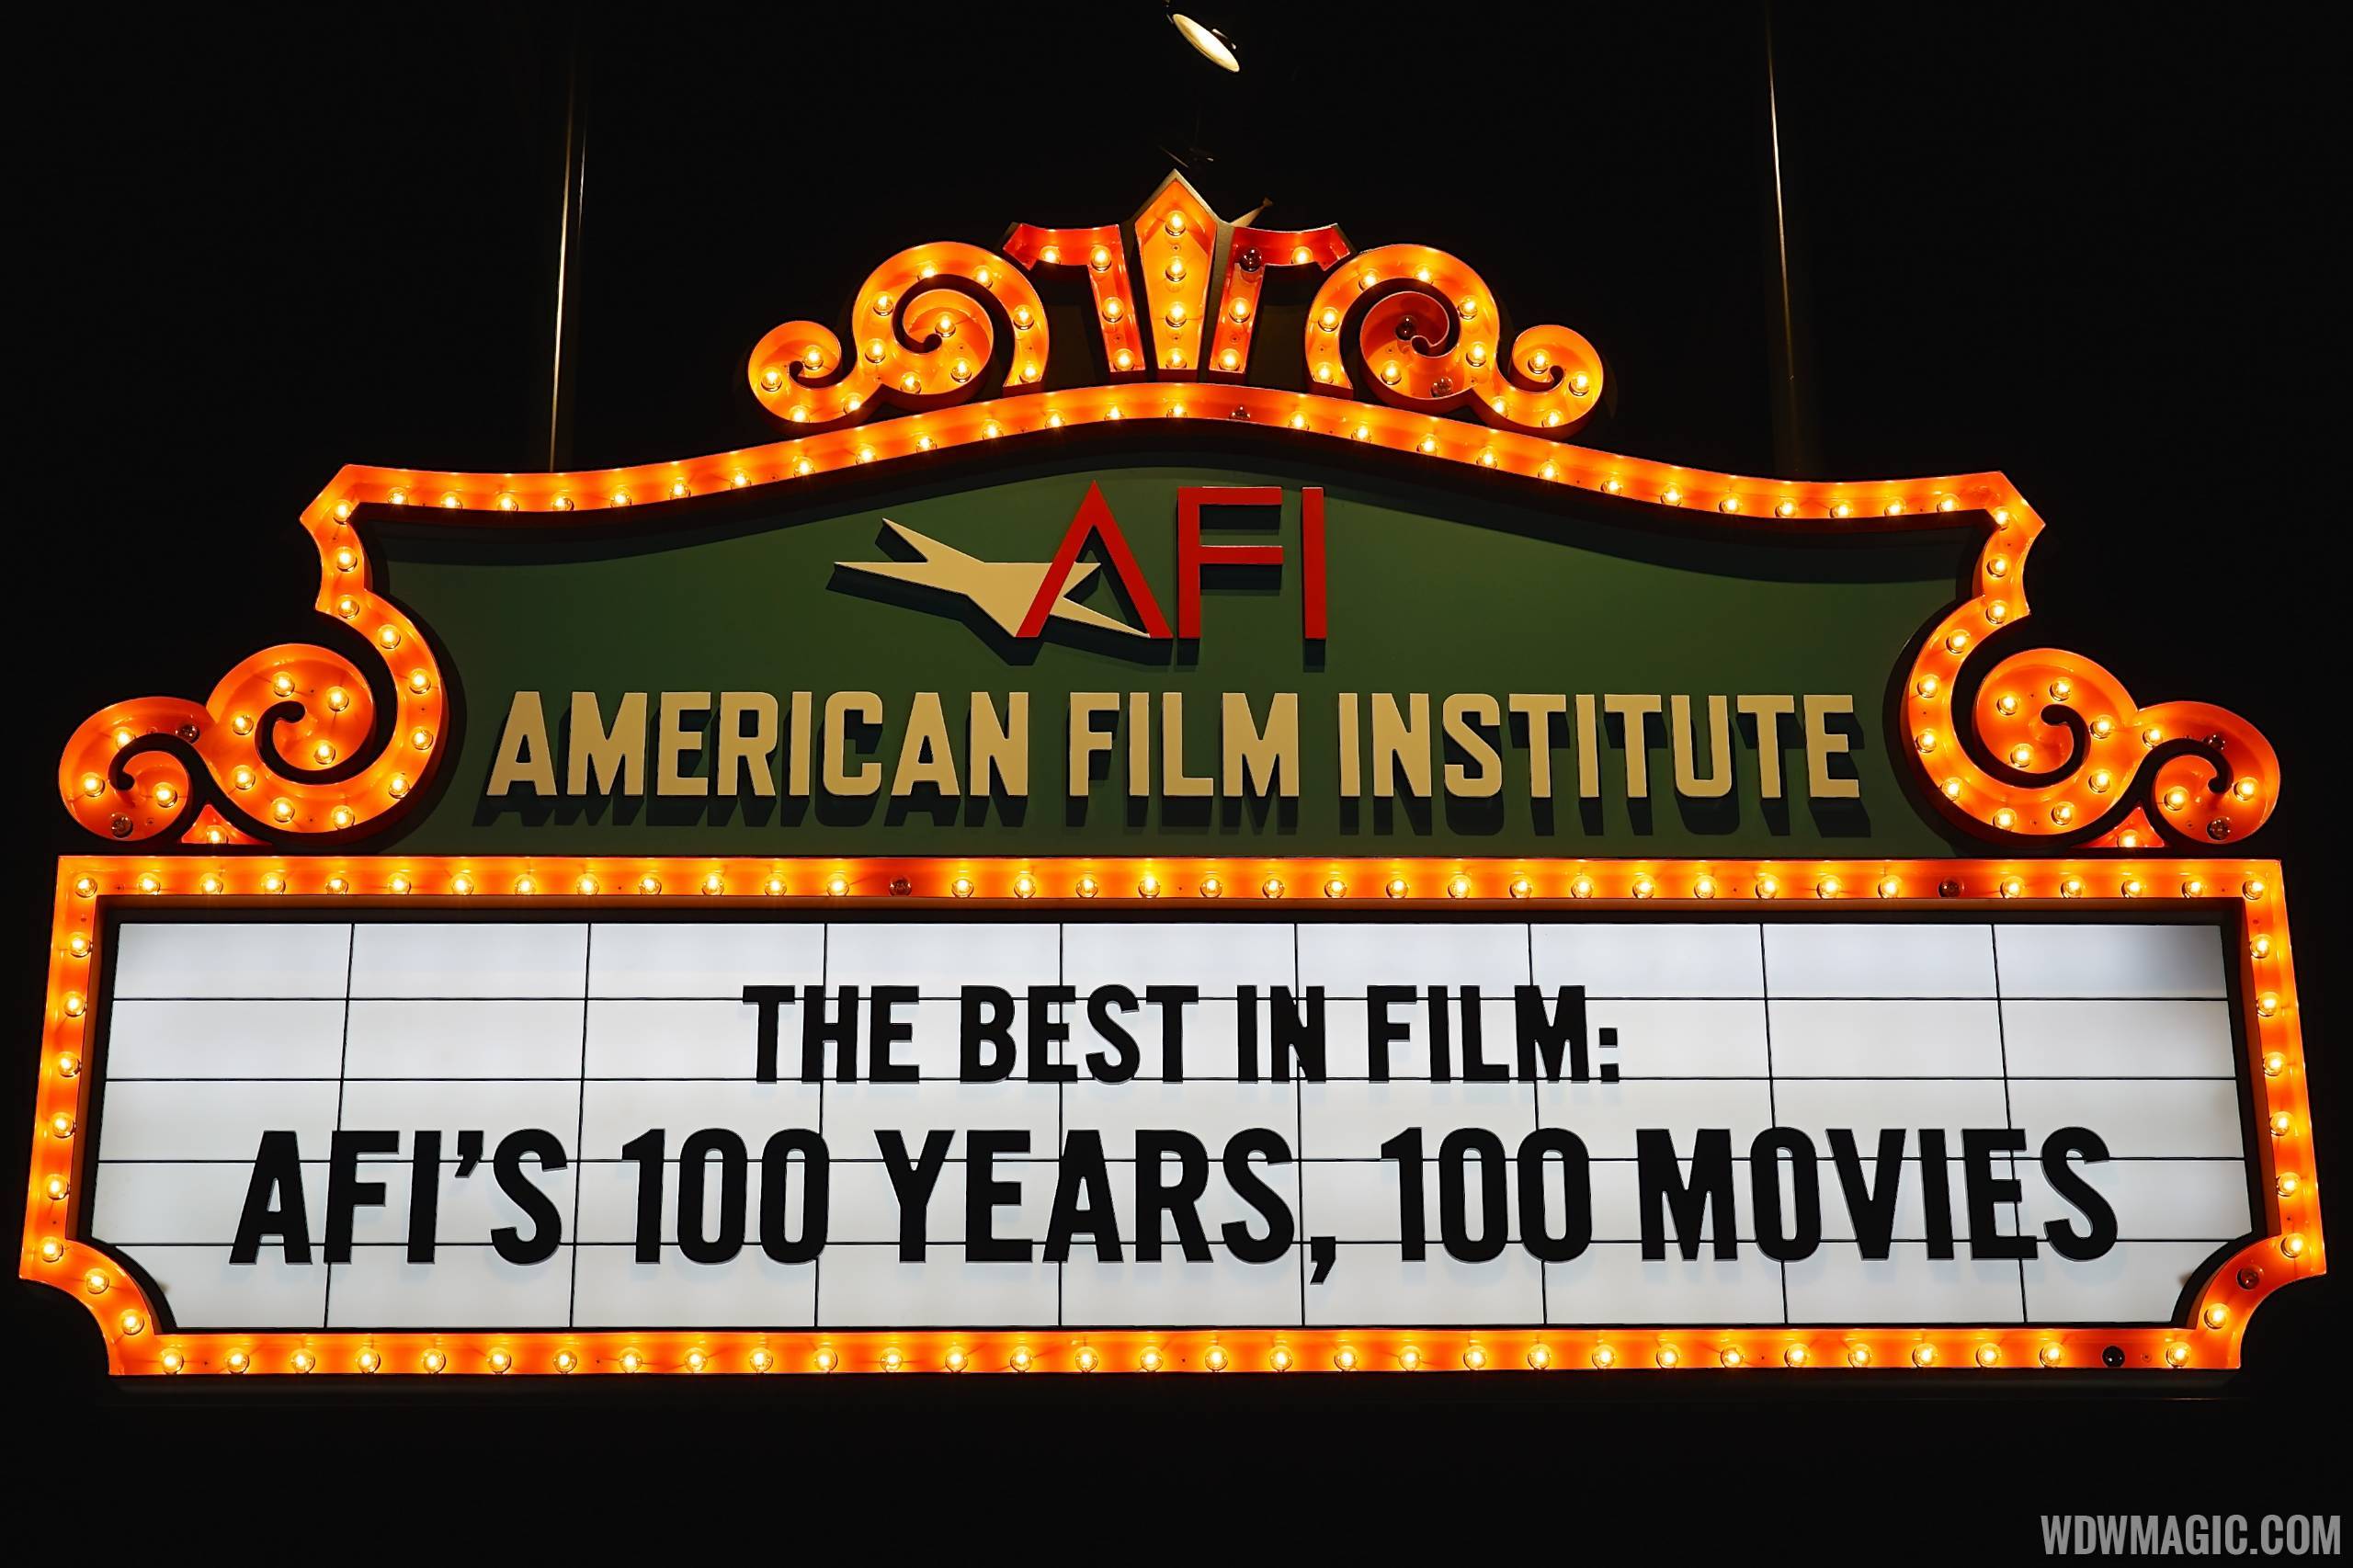 PHOTOS - A final look at the now closed American Film Institute Showcase